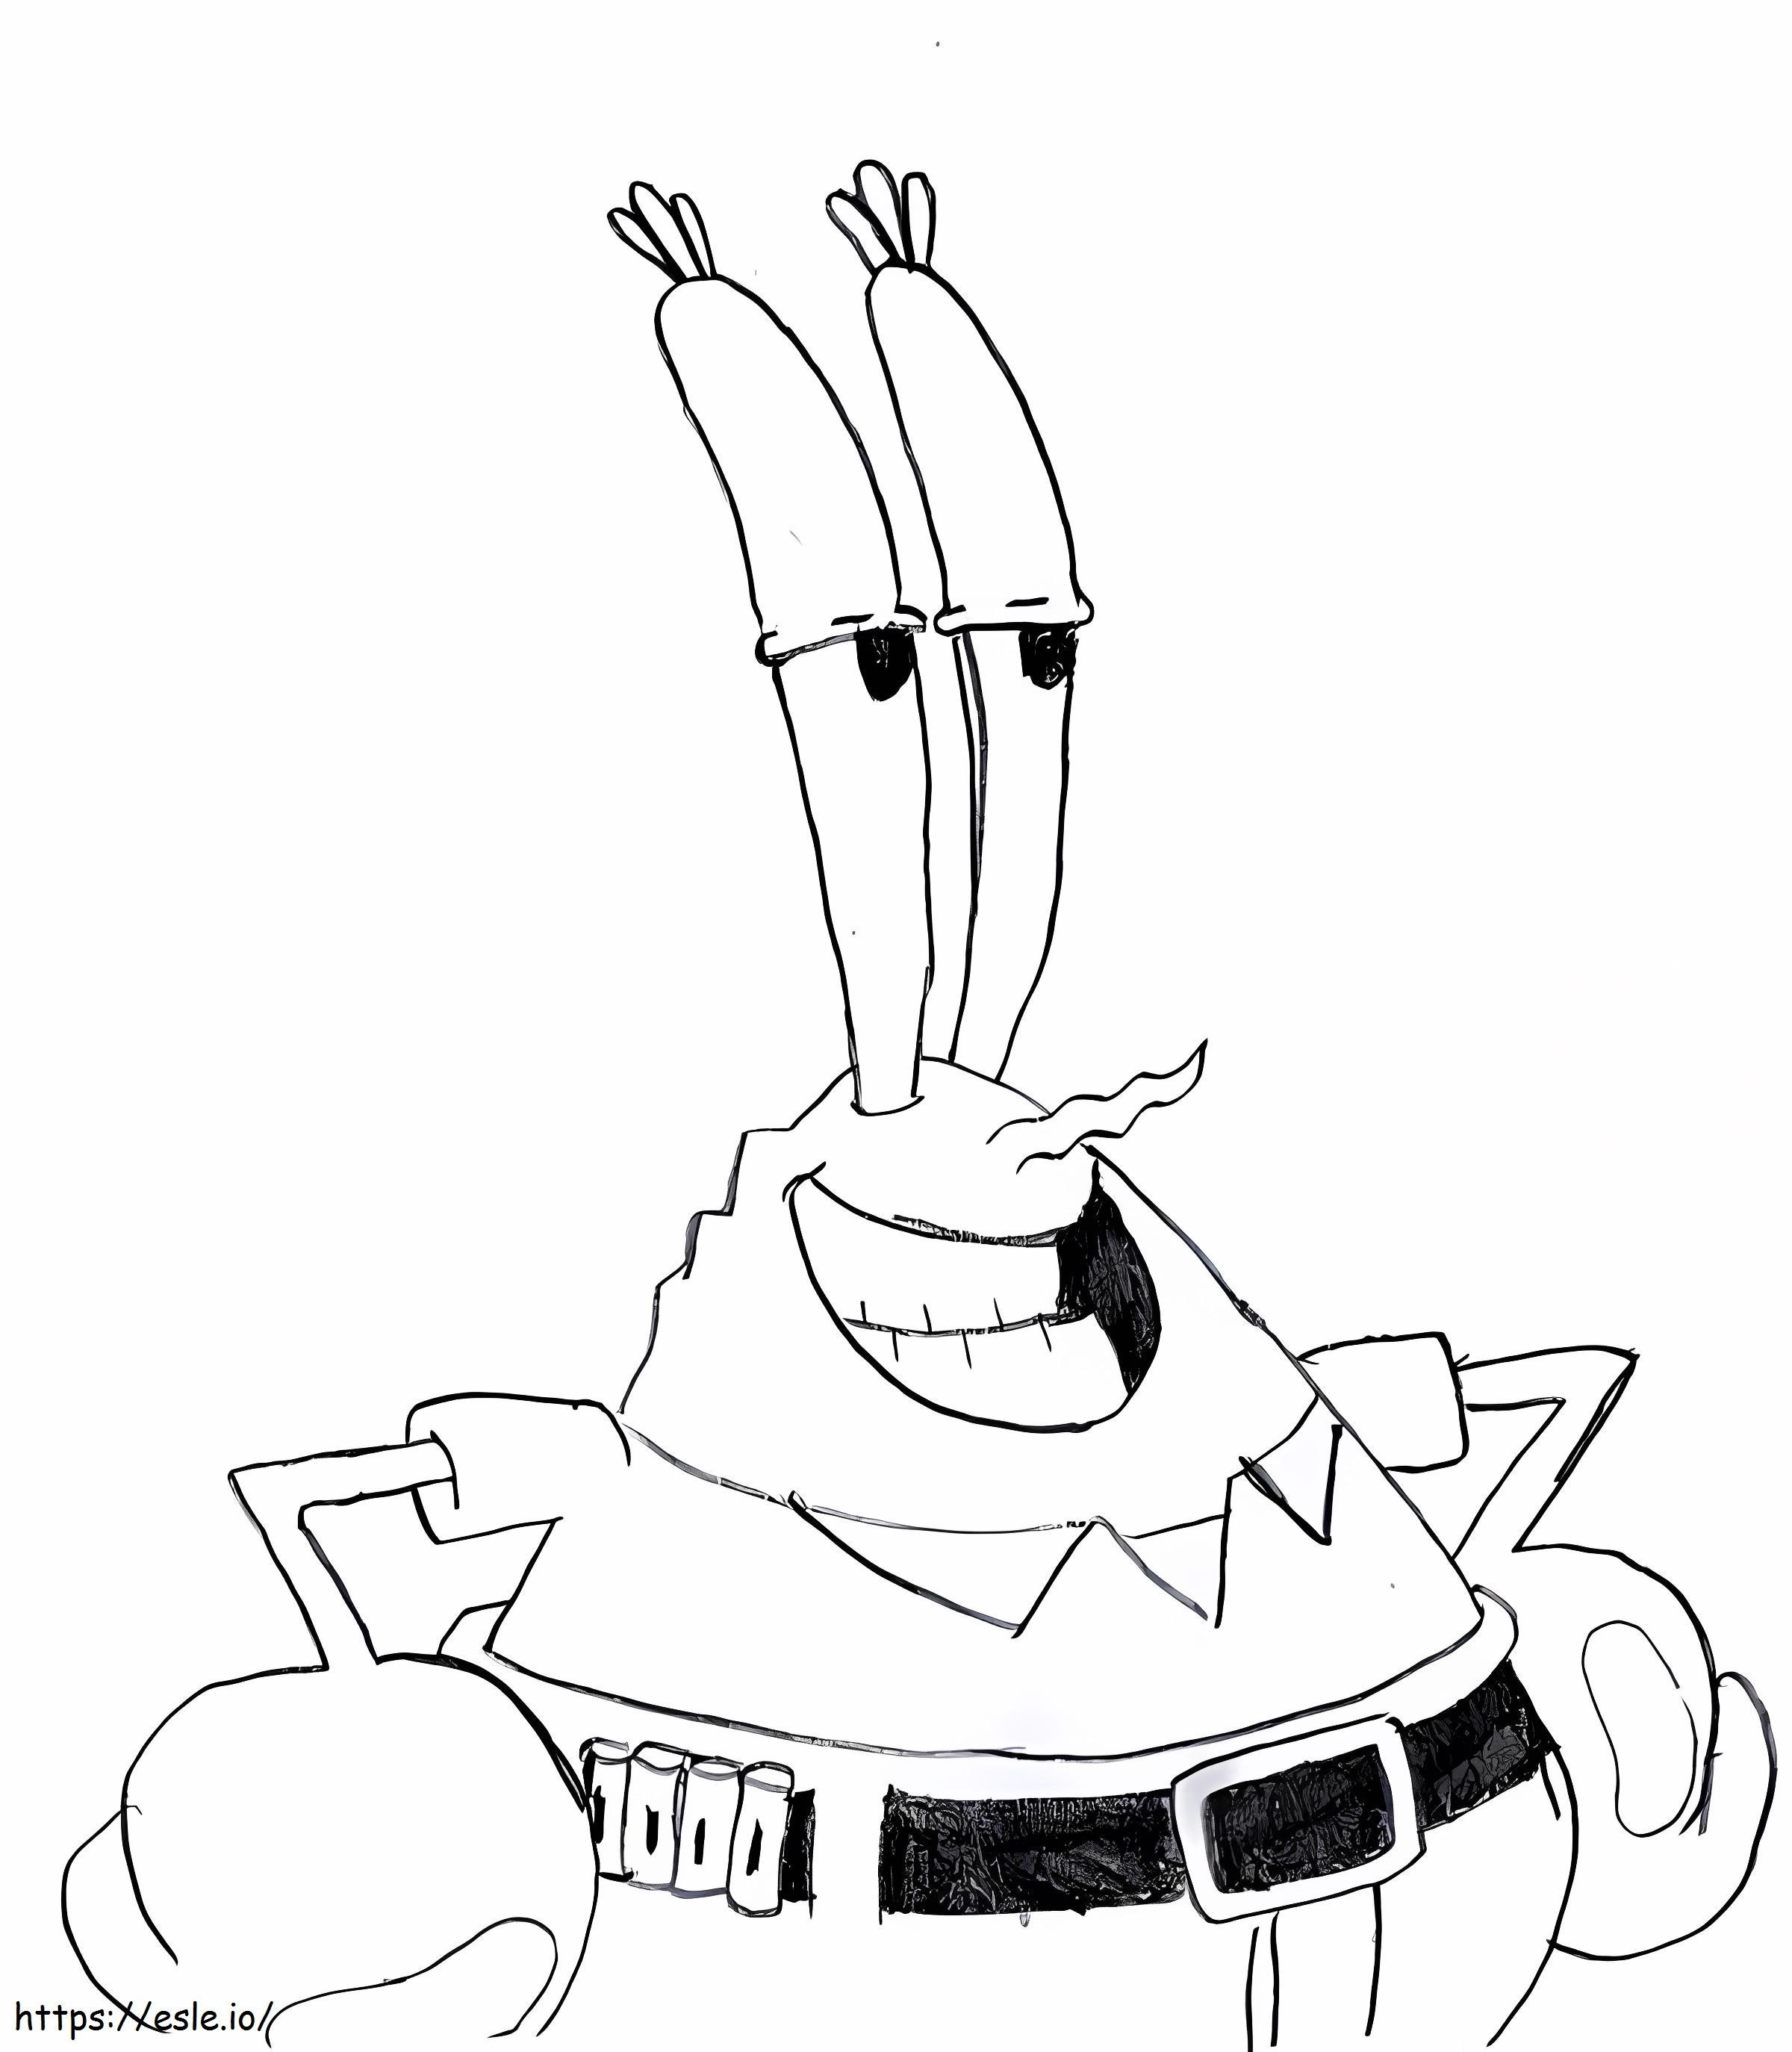 Face Mr. Krabs coloring page